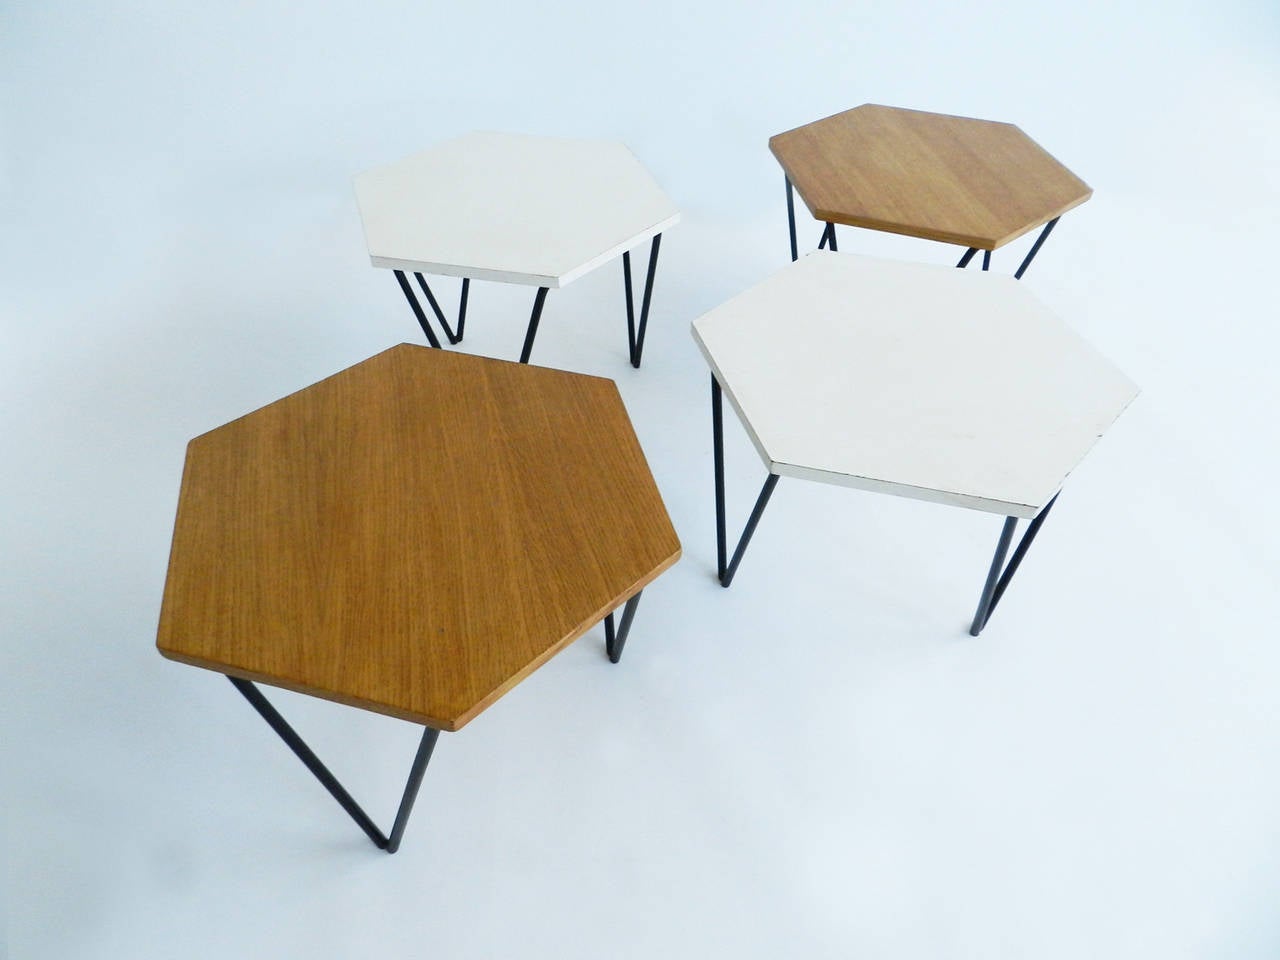 Italian Set of 4 Gio Ponti Laminated and Wood Modular Coffee Tables for ISA